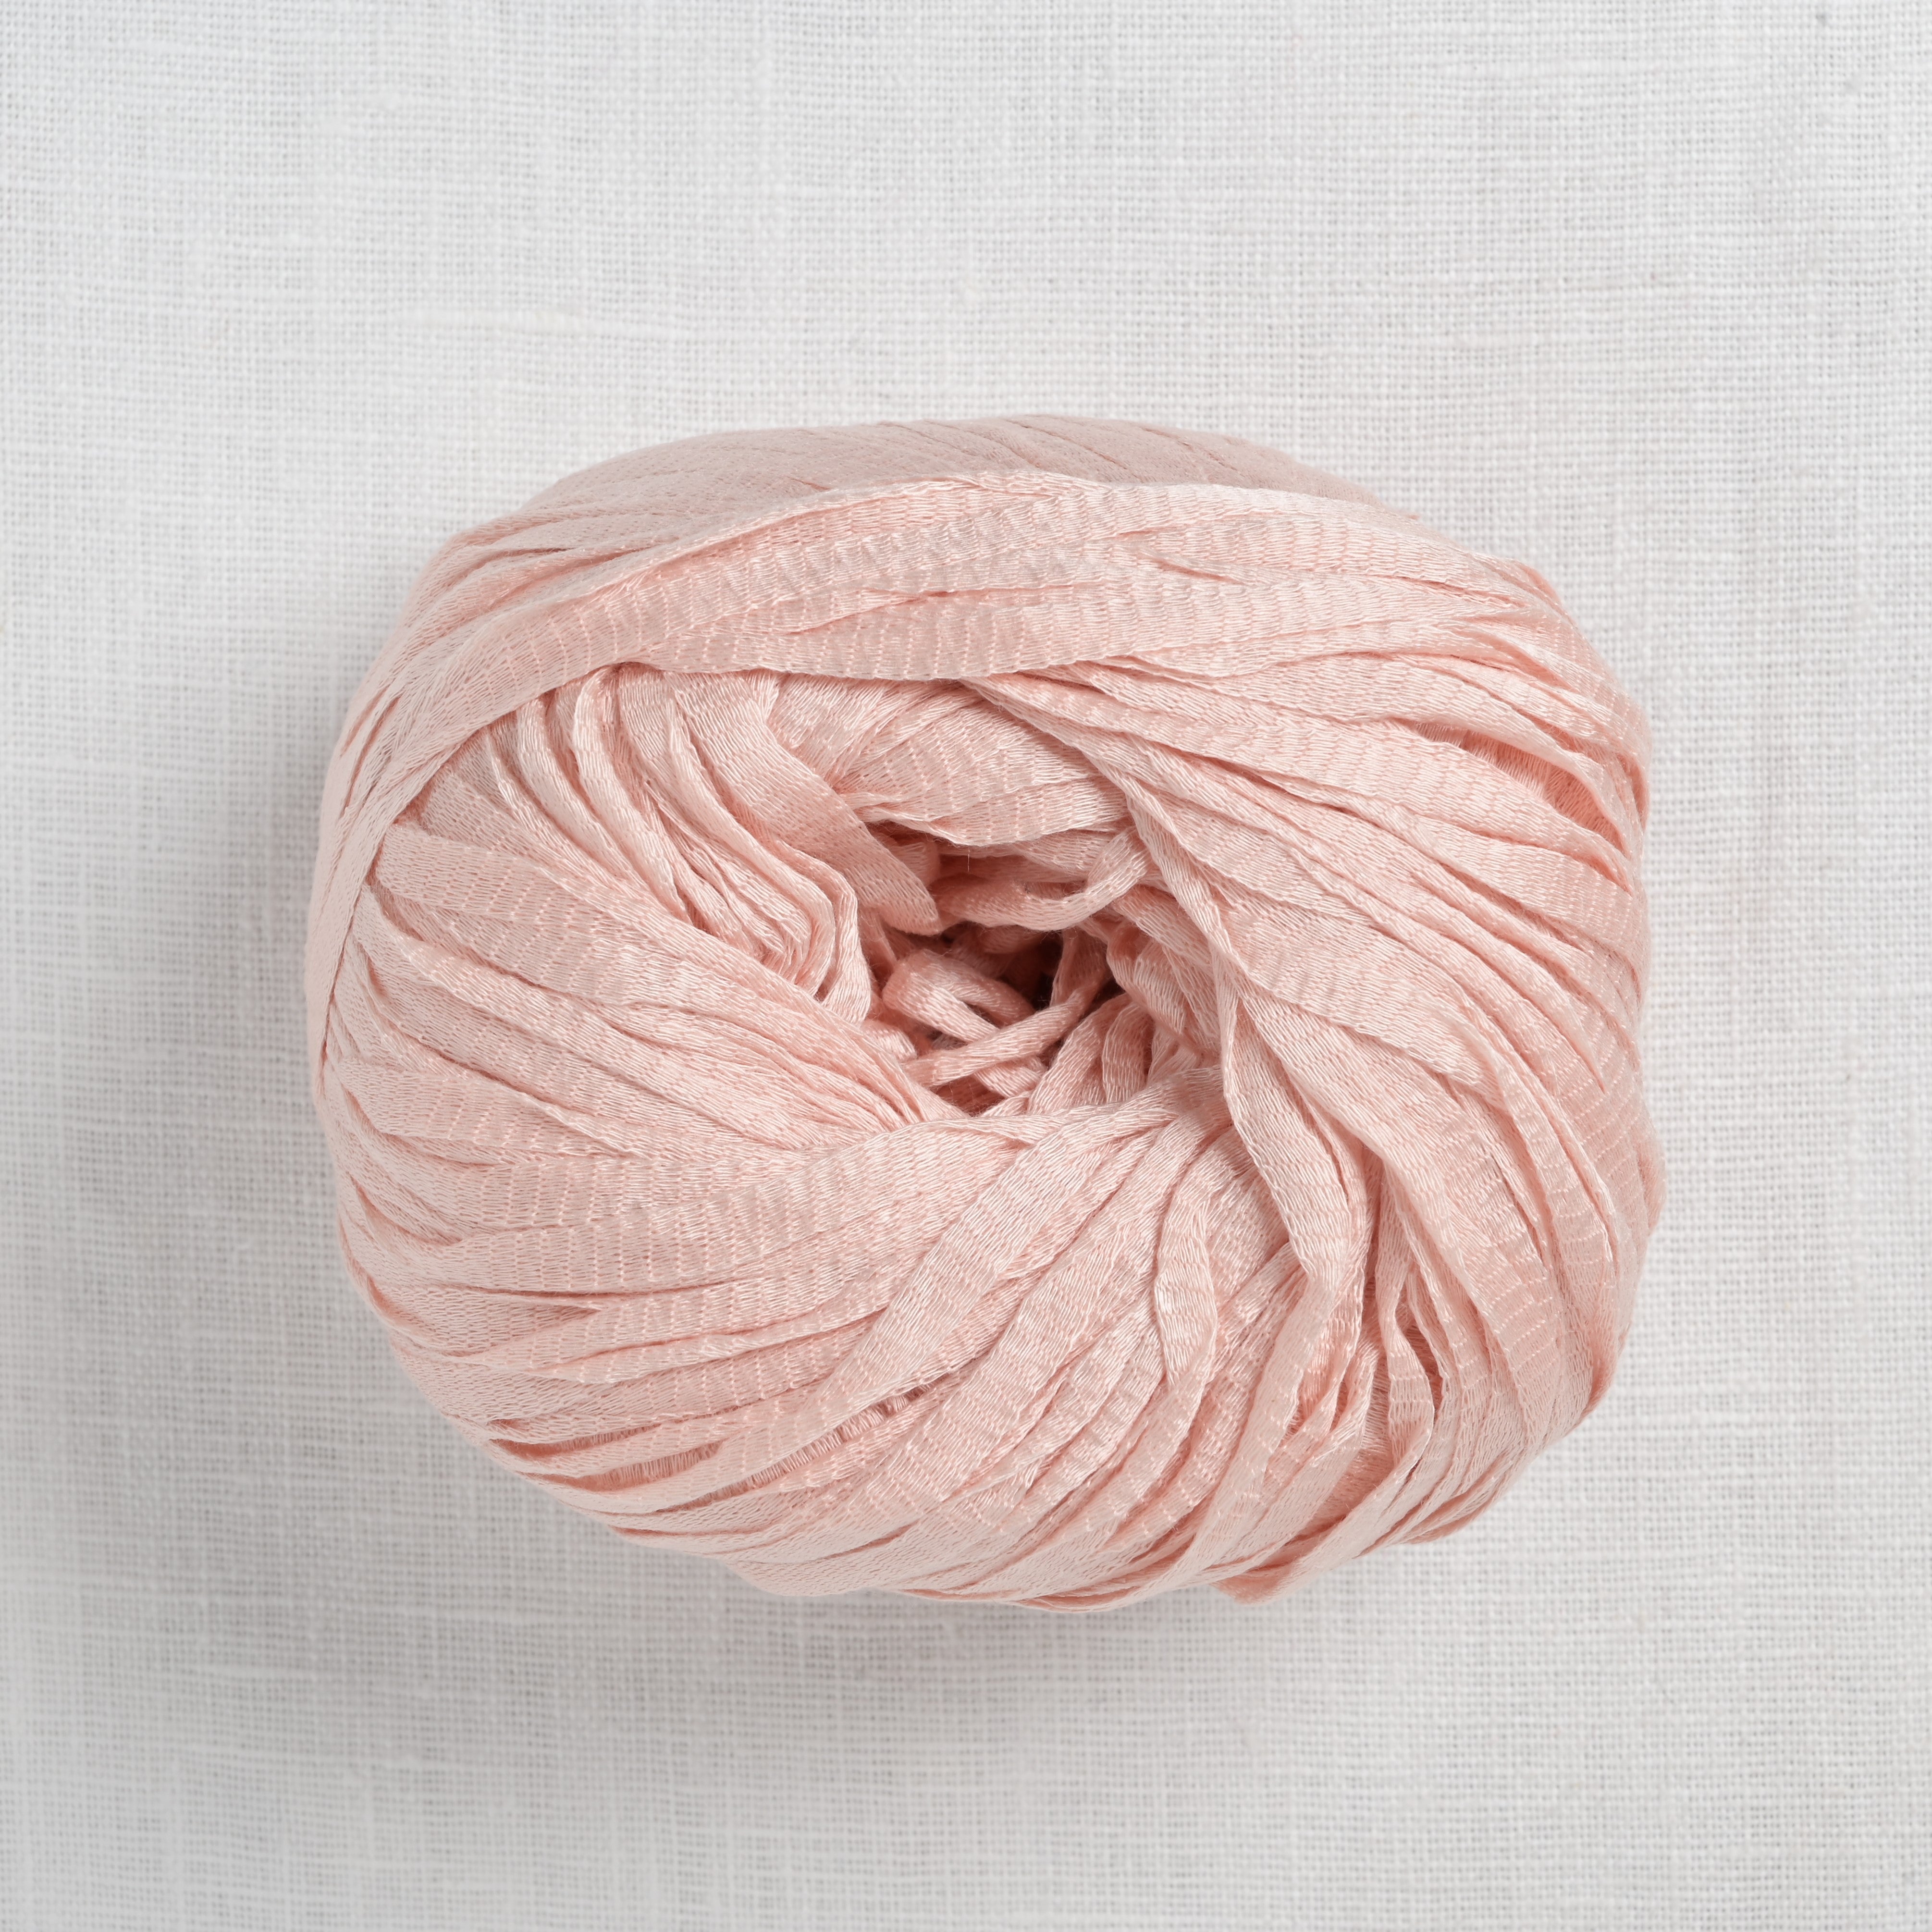 Wool and the Gang - Cameo Rose, Mineral Pink or Rocksalt Red